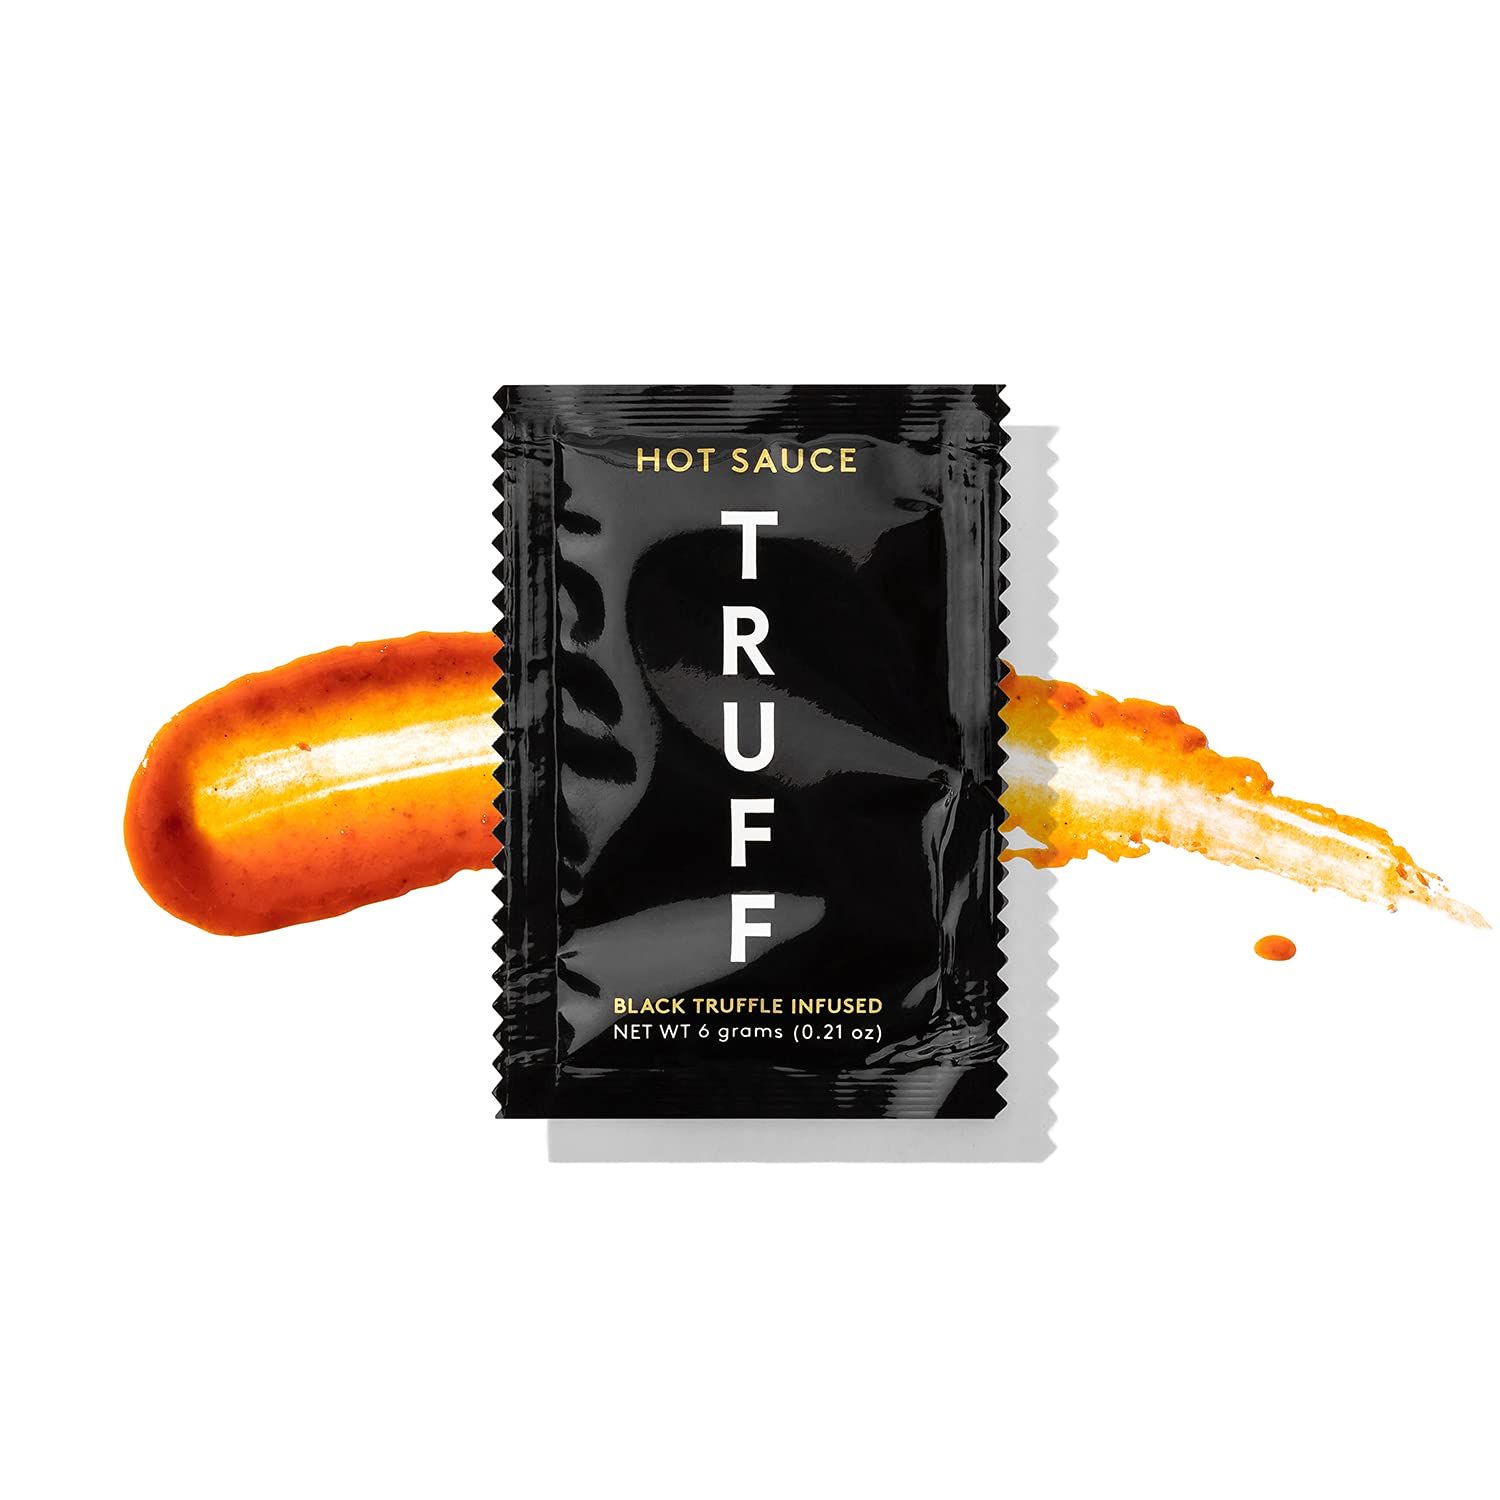 TRUFF Black Truffle Hot Sauce Packets, 20 Count Set, Portable Travel Size of Gourmet Hot Sauce, B... | Amazon (US)